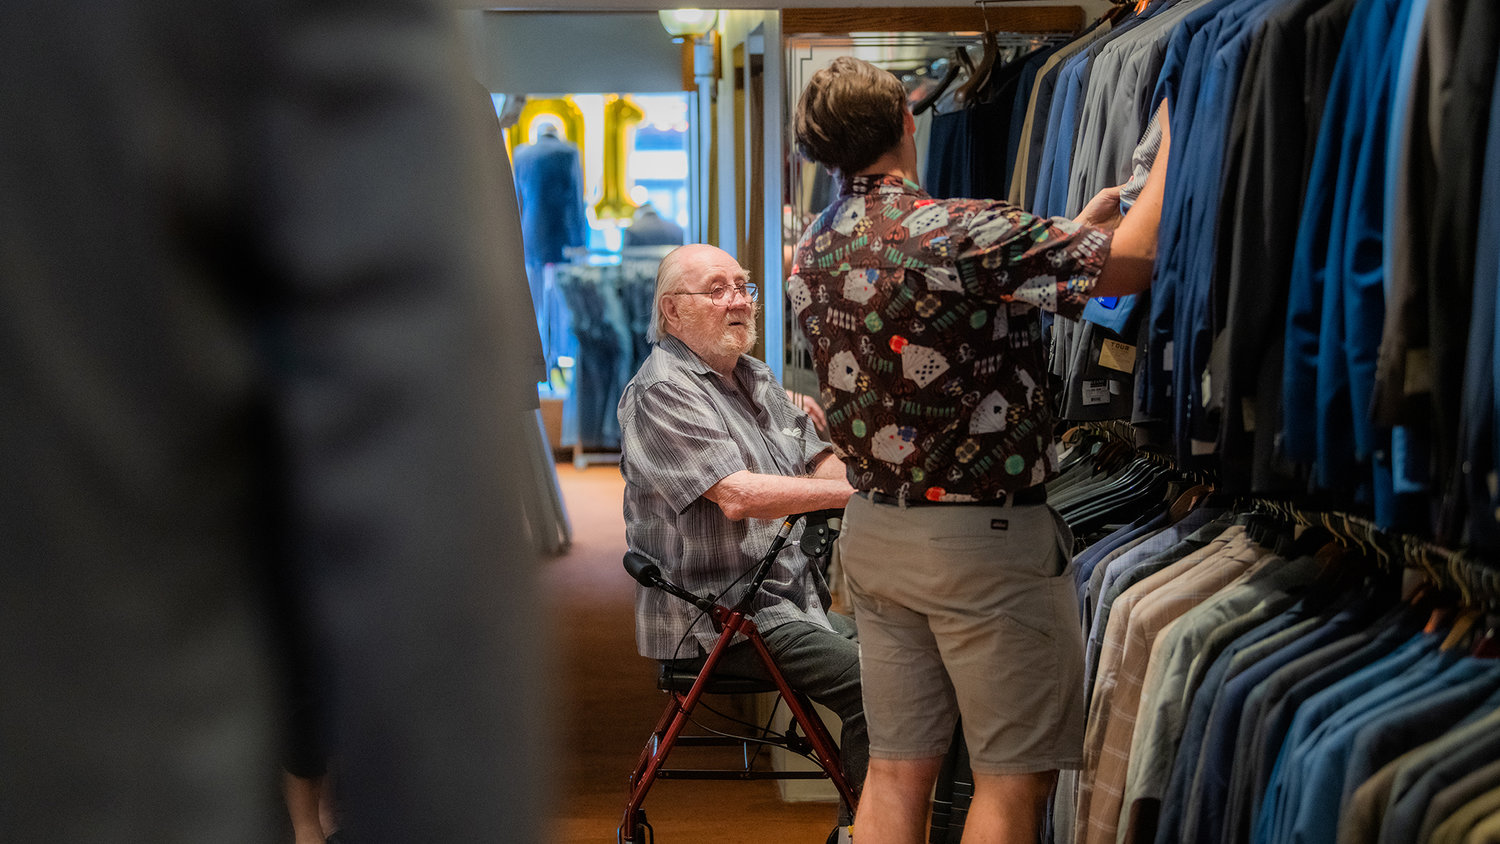 An employee helps a customer in finding a suit at Bartel's in Chehalis Tuesday afternoon.